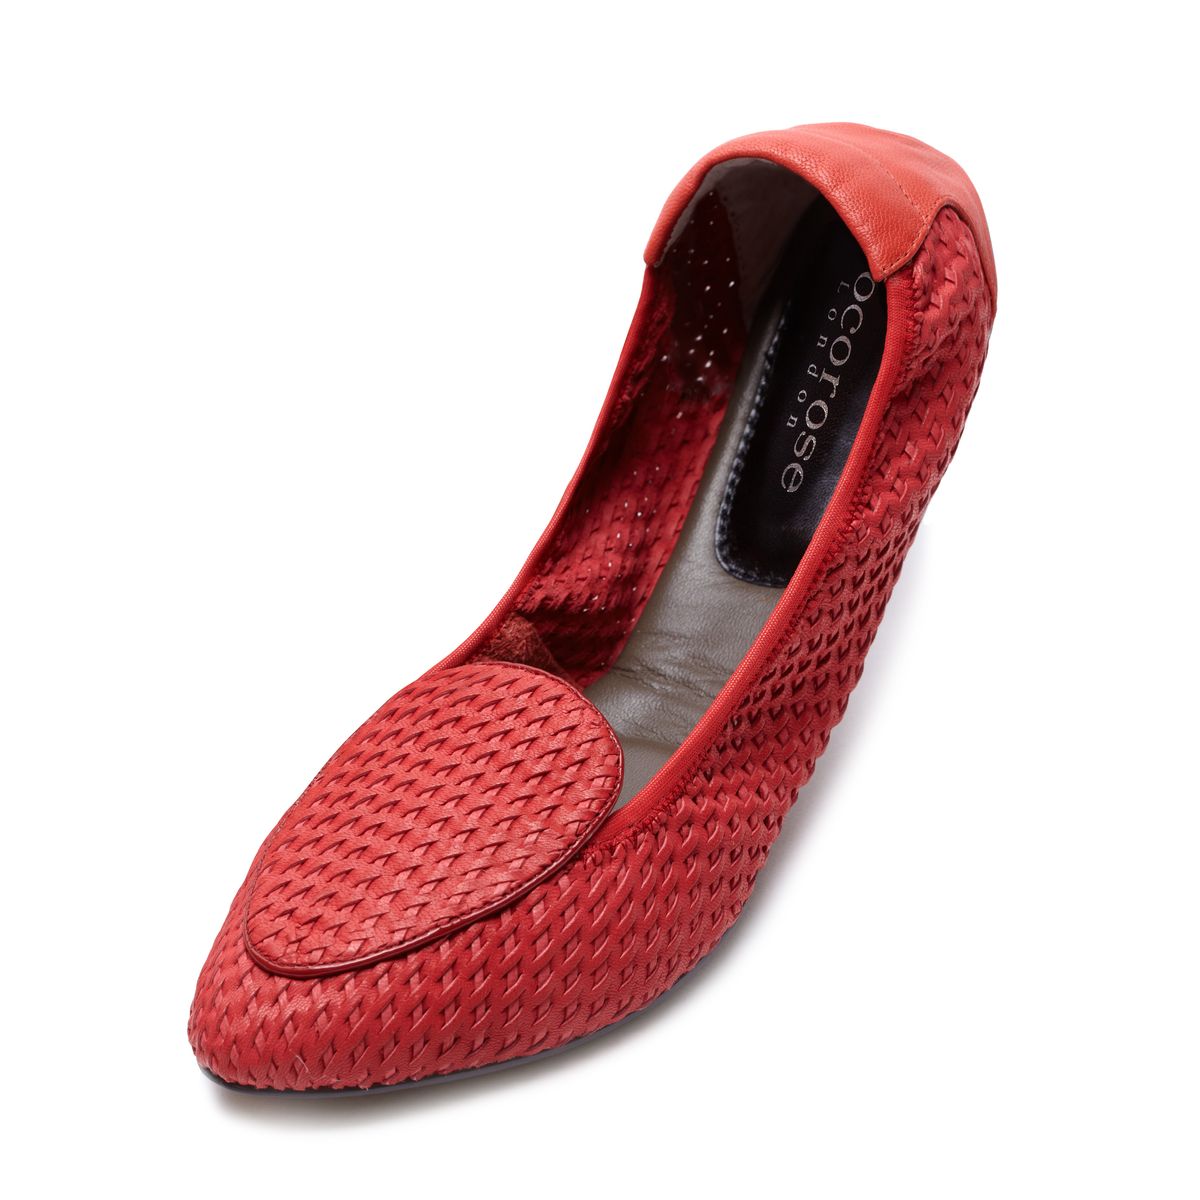 Coral leather loafers from Cocorose London